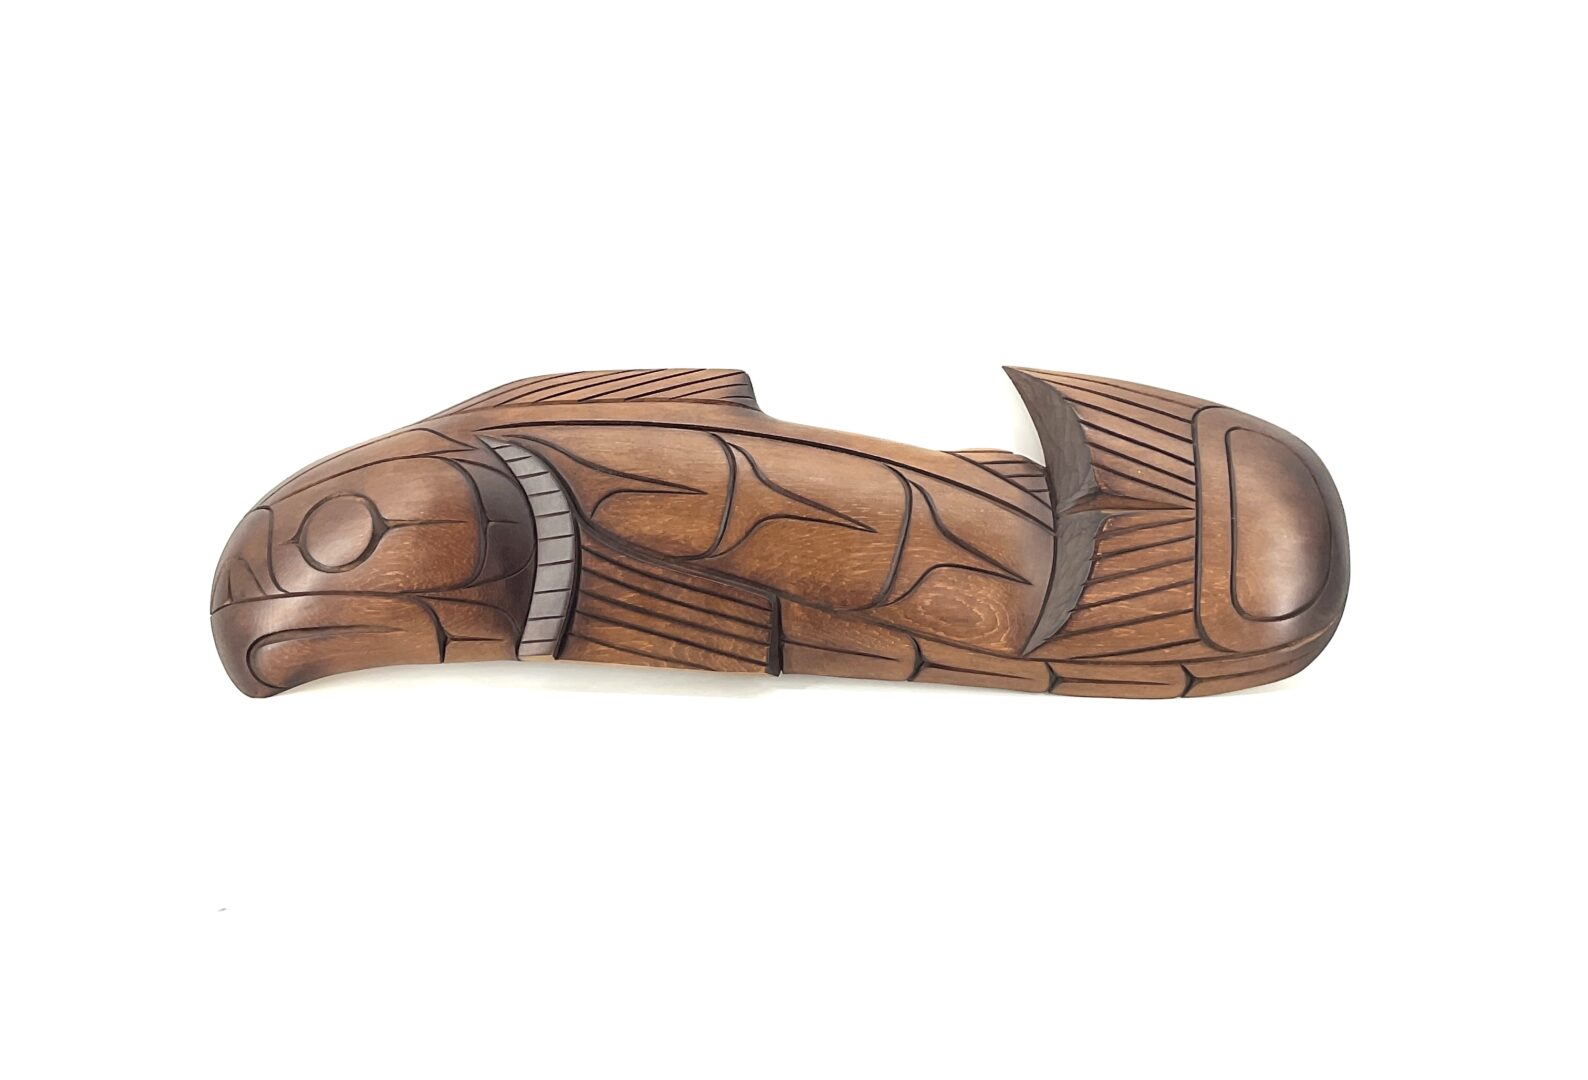 One original Indigenous, First Nations art sculpture hand made from red cedar wood by Doran Lewis ''Salmon plaque''.